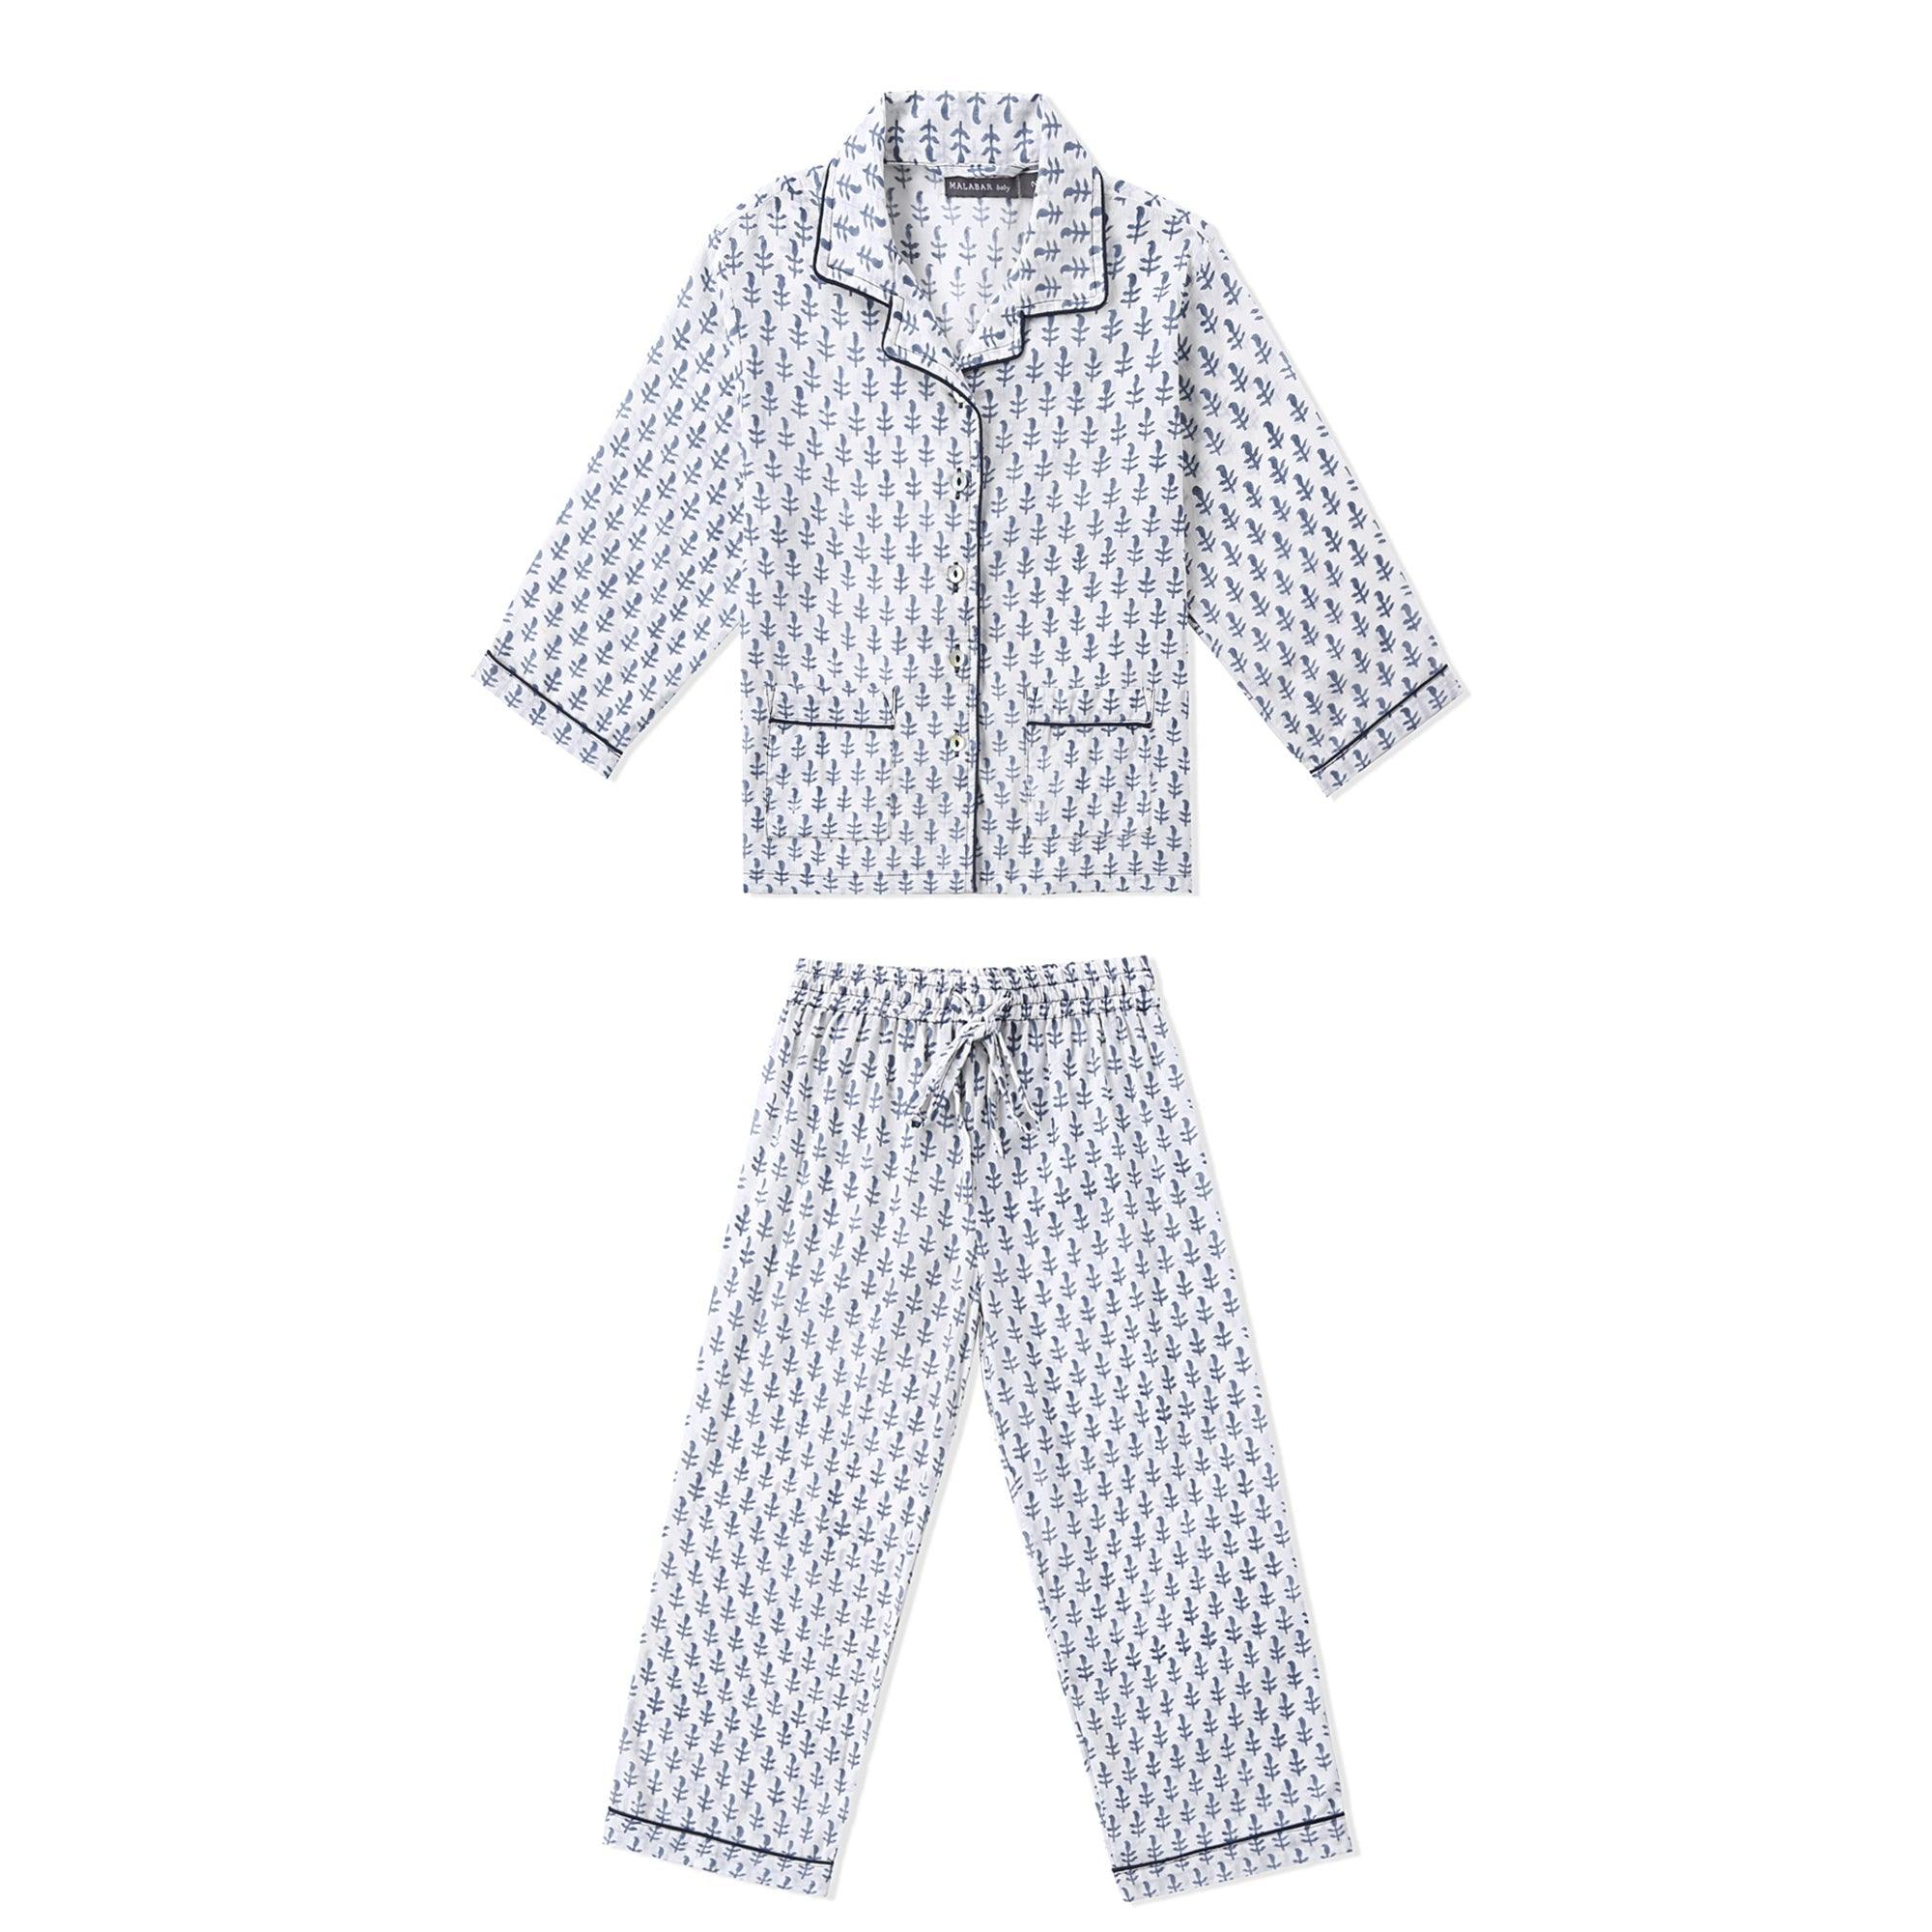 Men's Loungewear PJ 2pc Gift Set - Why and Whale